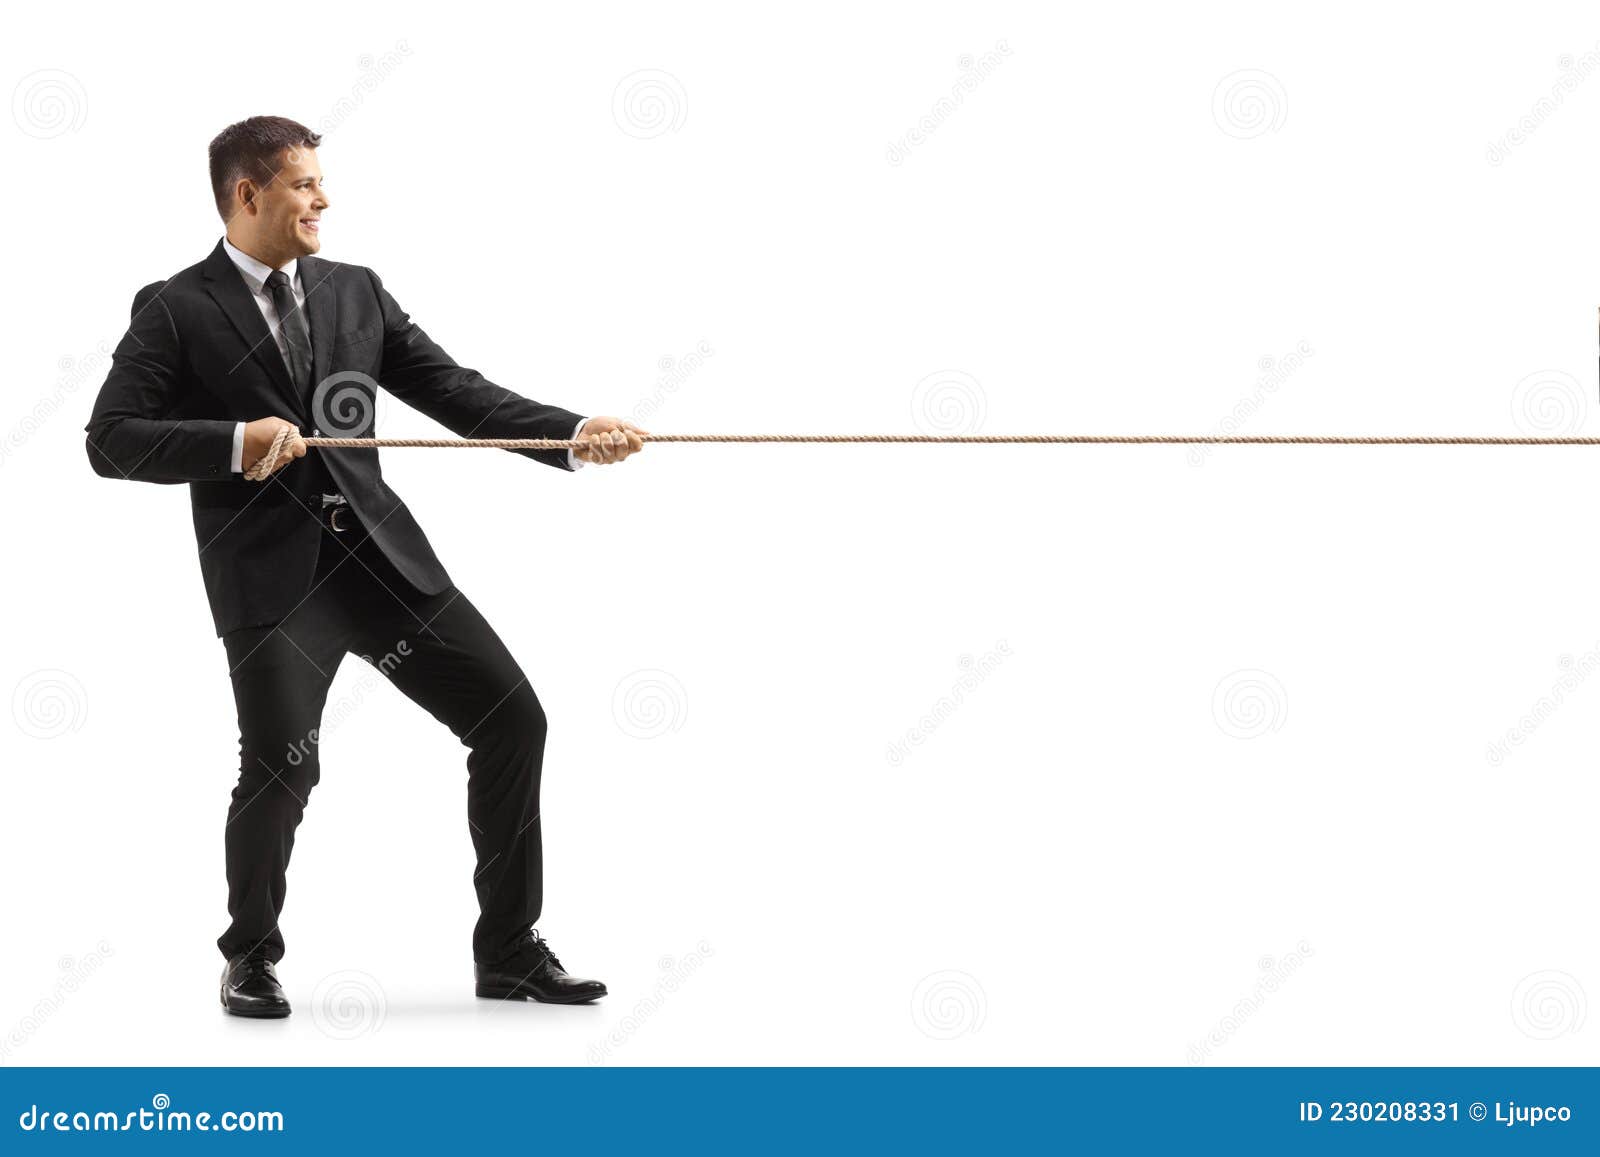 Full Length Profile Shot of a Businessman in Suit and Tie Pulling a Rope  Stock Image - Image of people, strain: 230208331